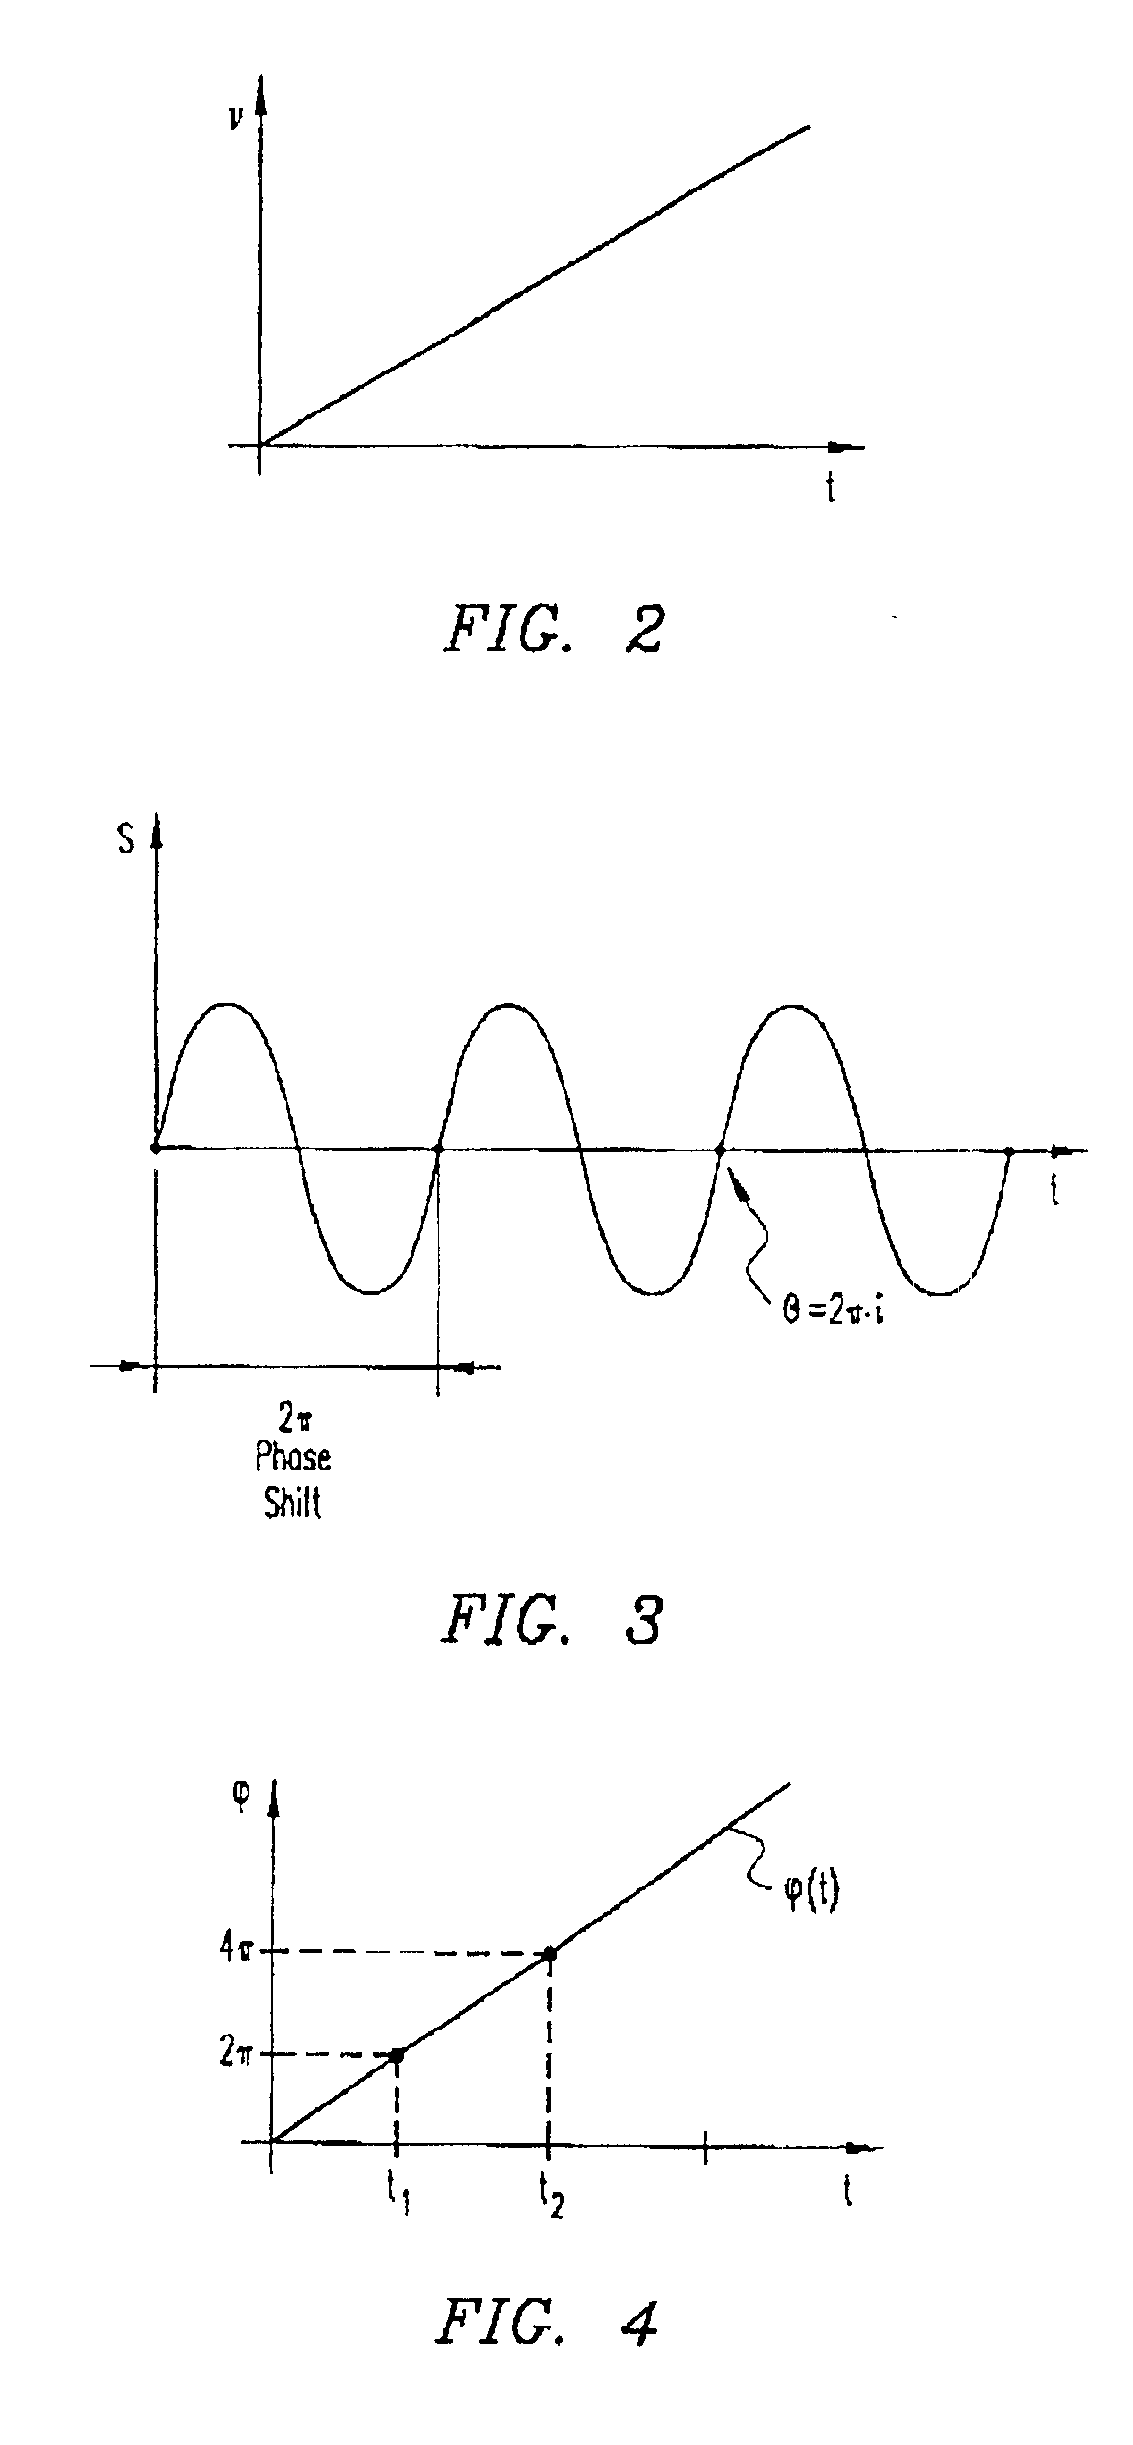 Method and system for measuring optical characteristics of a sub-component within a composite optical system